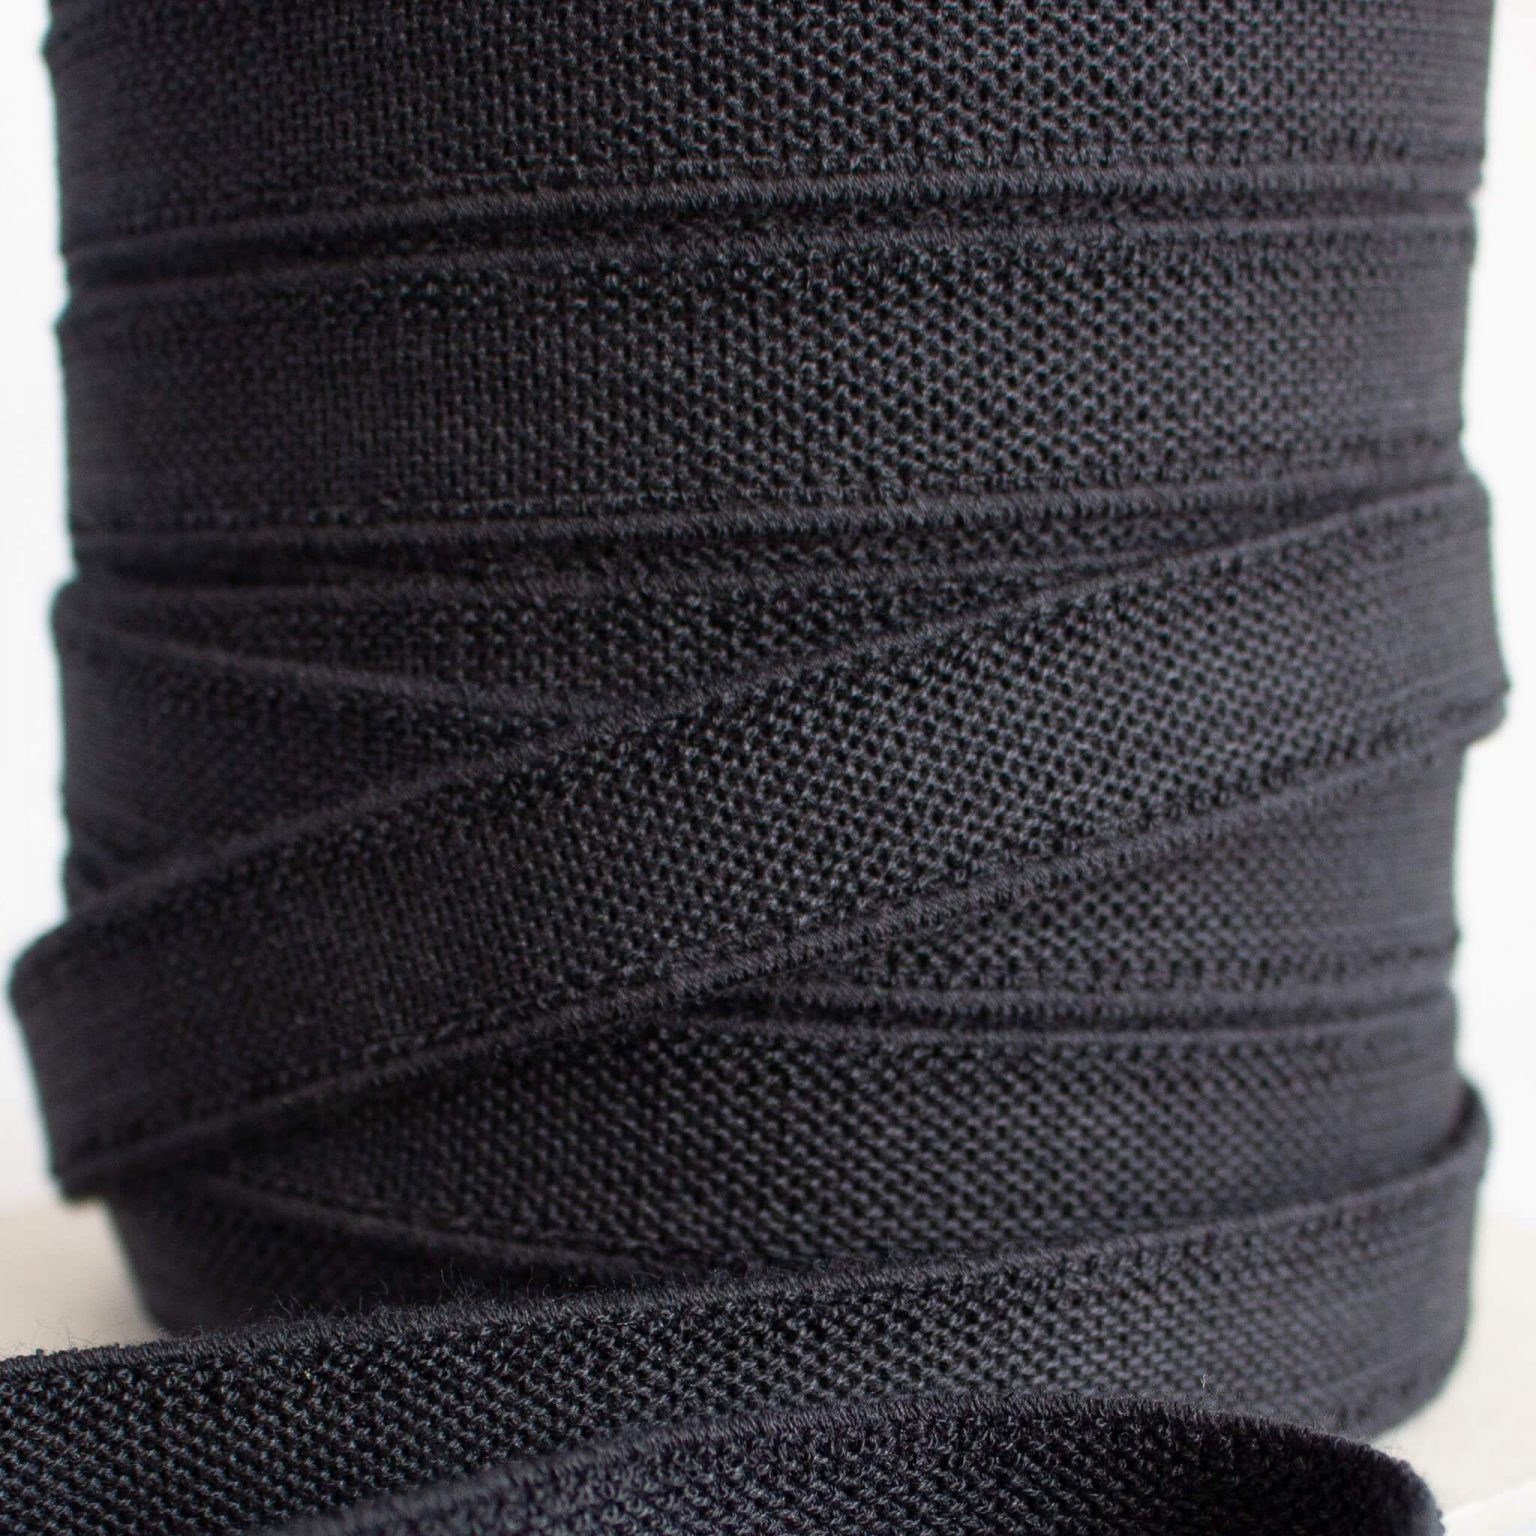 Black elastic on a roll close up of the texture